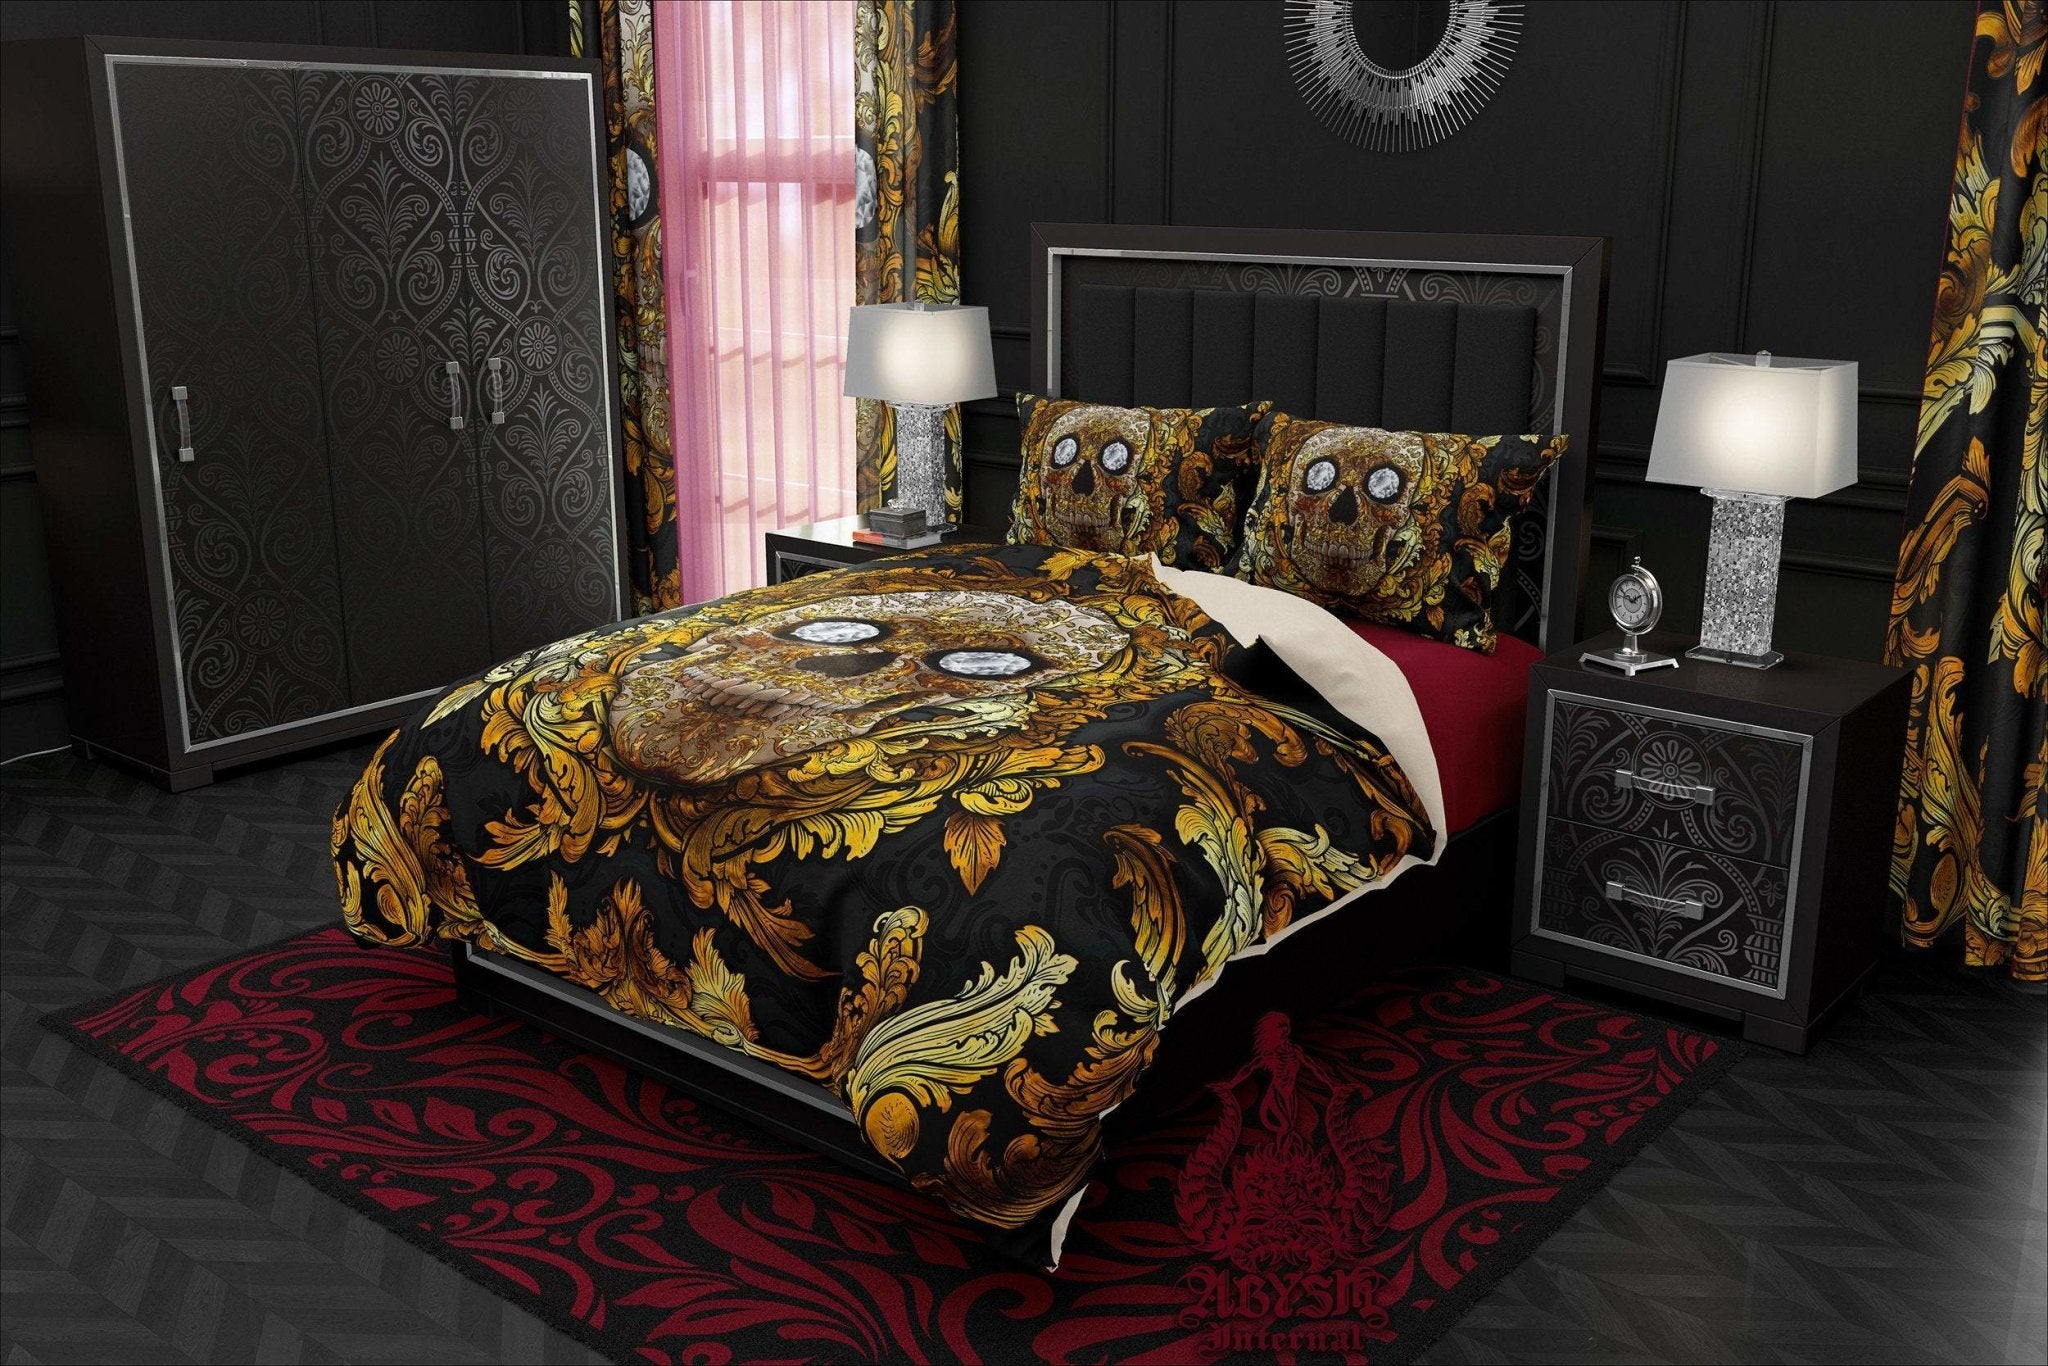 Skull Bedding Set, Comforter and Duvet, Victorian Gothic Bed Cover and Bedroom Decor, King, Queen and Twin Size - Gold and Diamonds - Abysm Internal